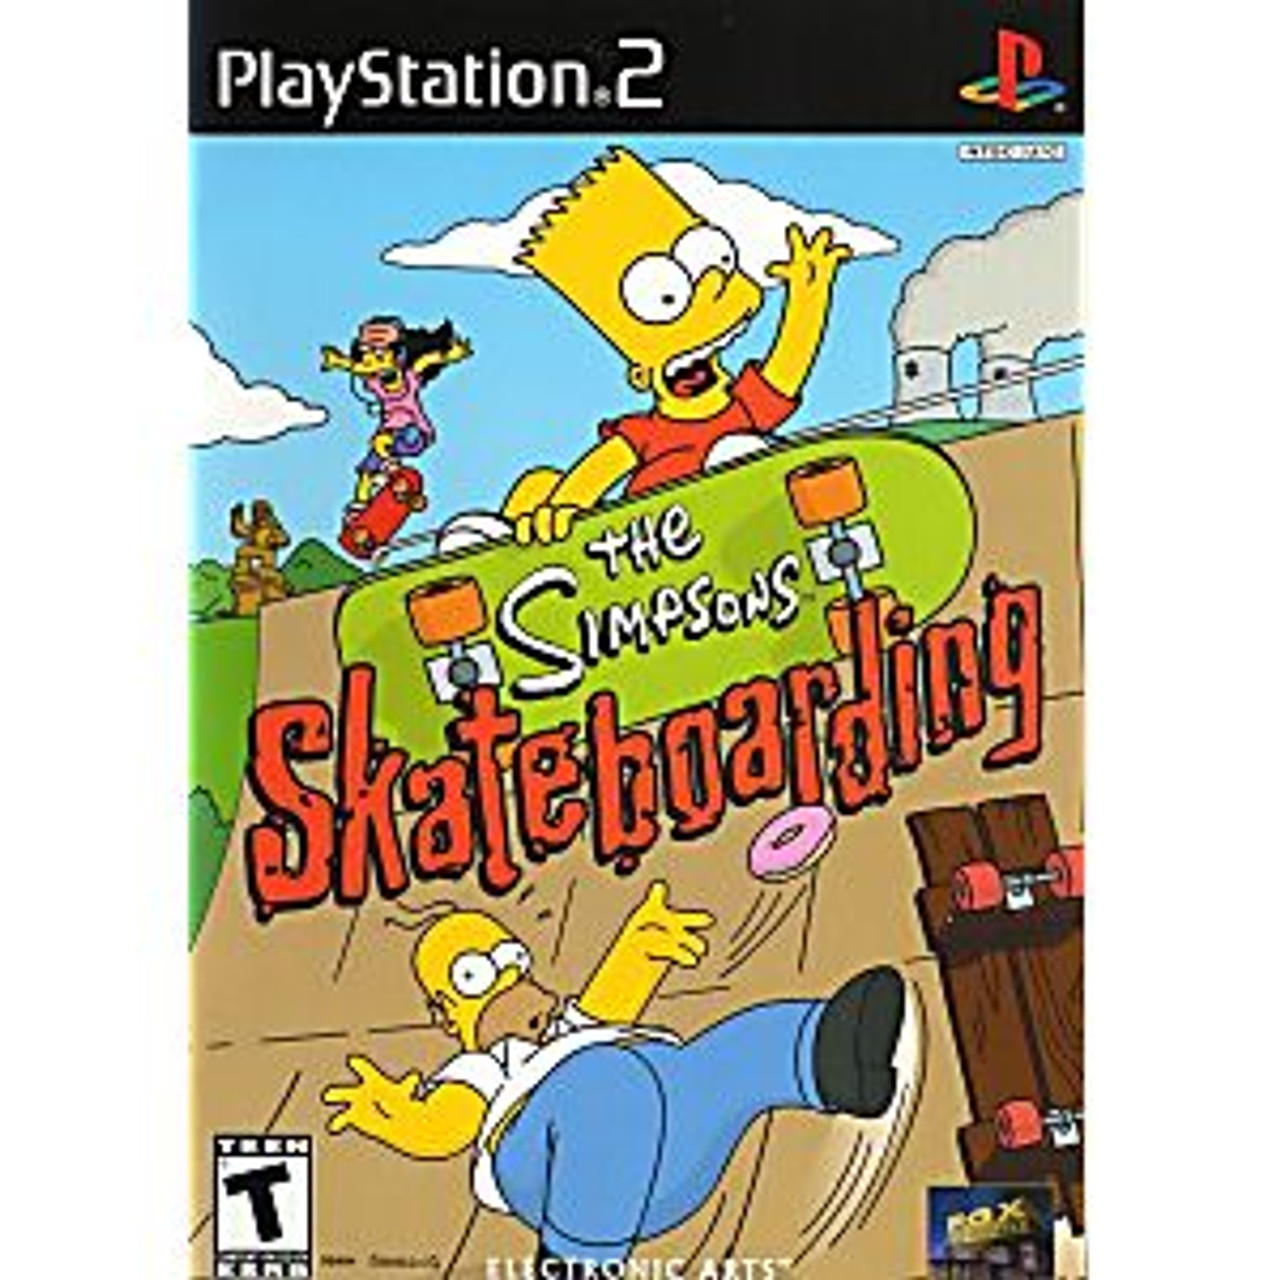 Simpsons The - Skateboarding Ps2